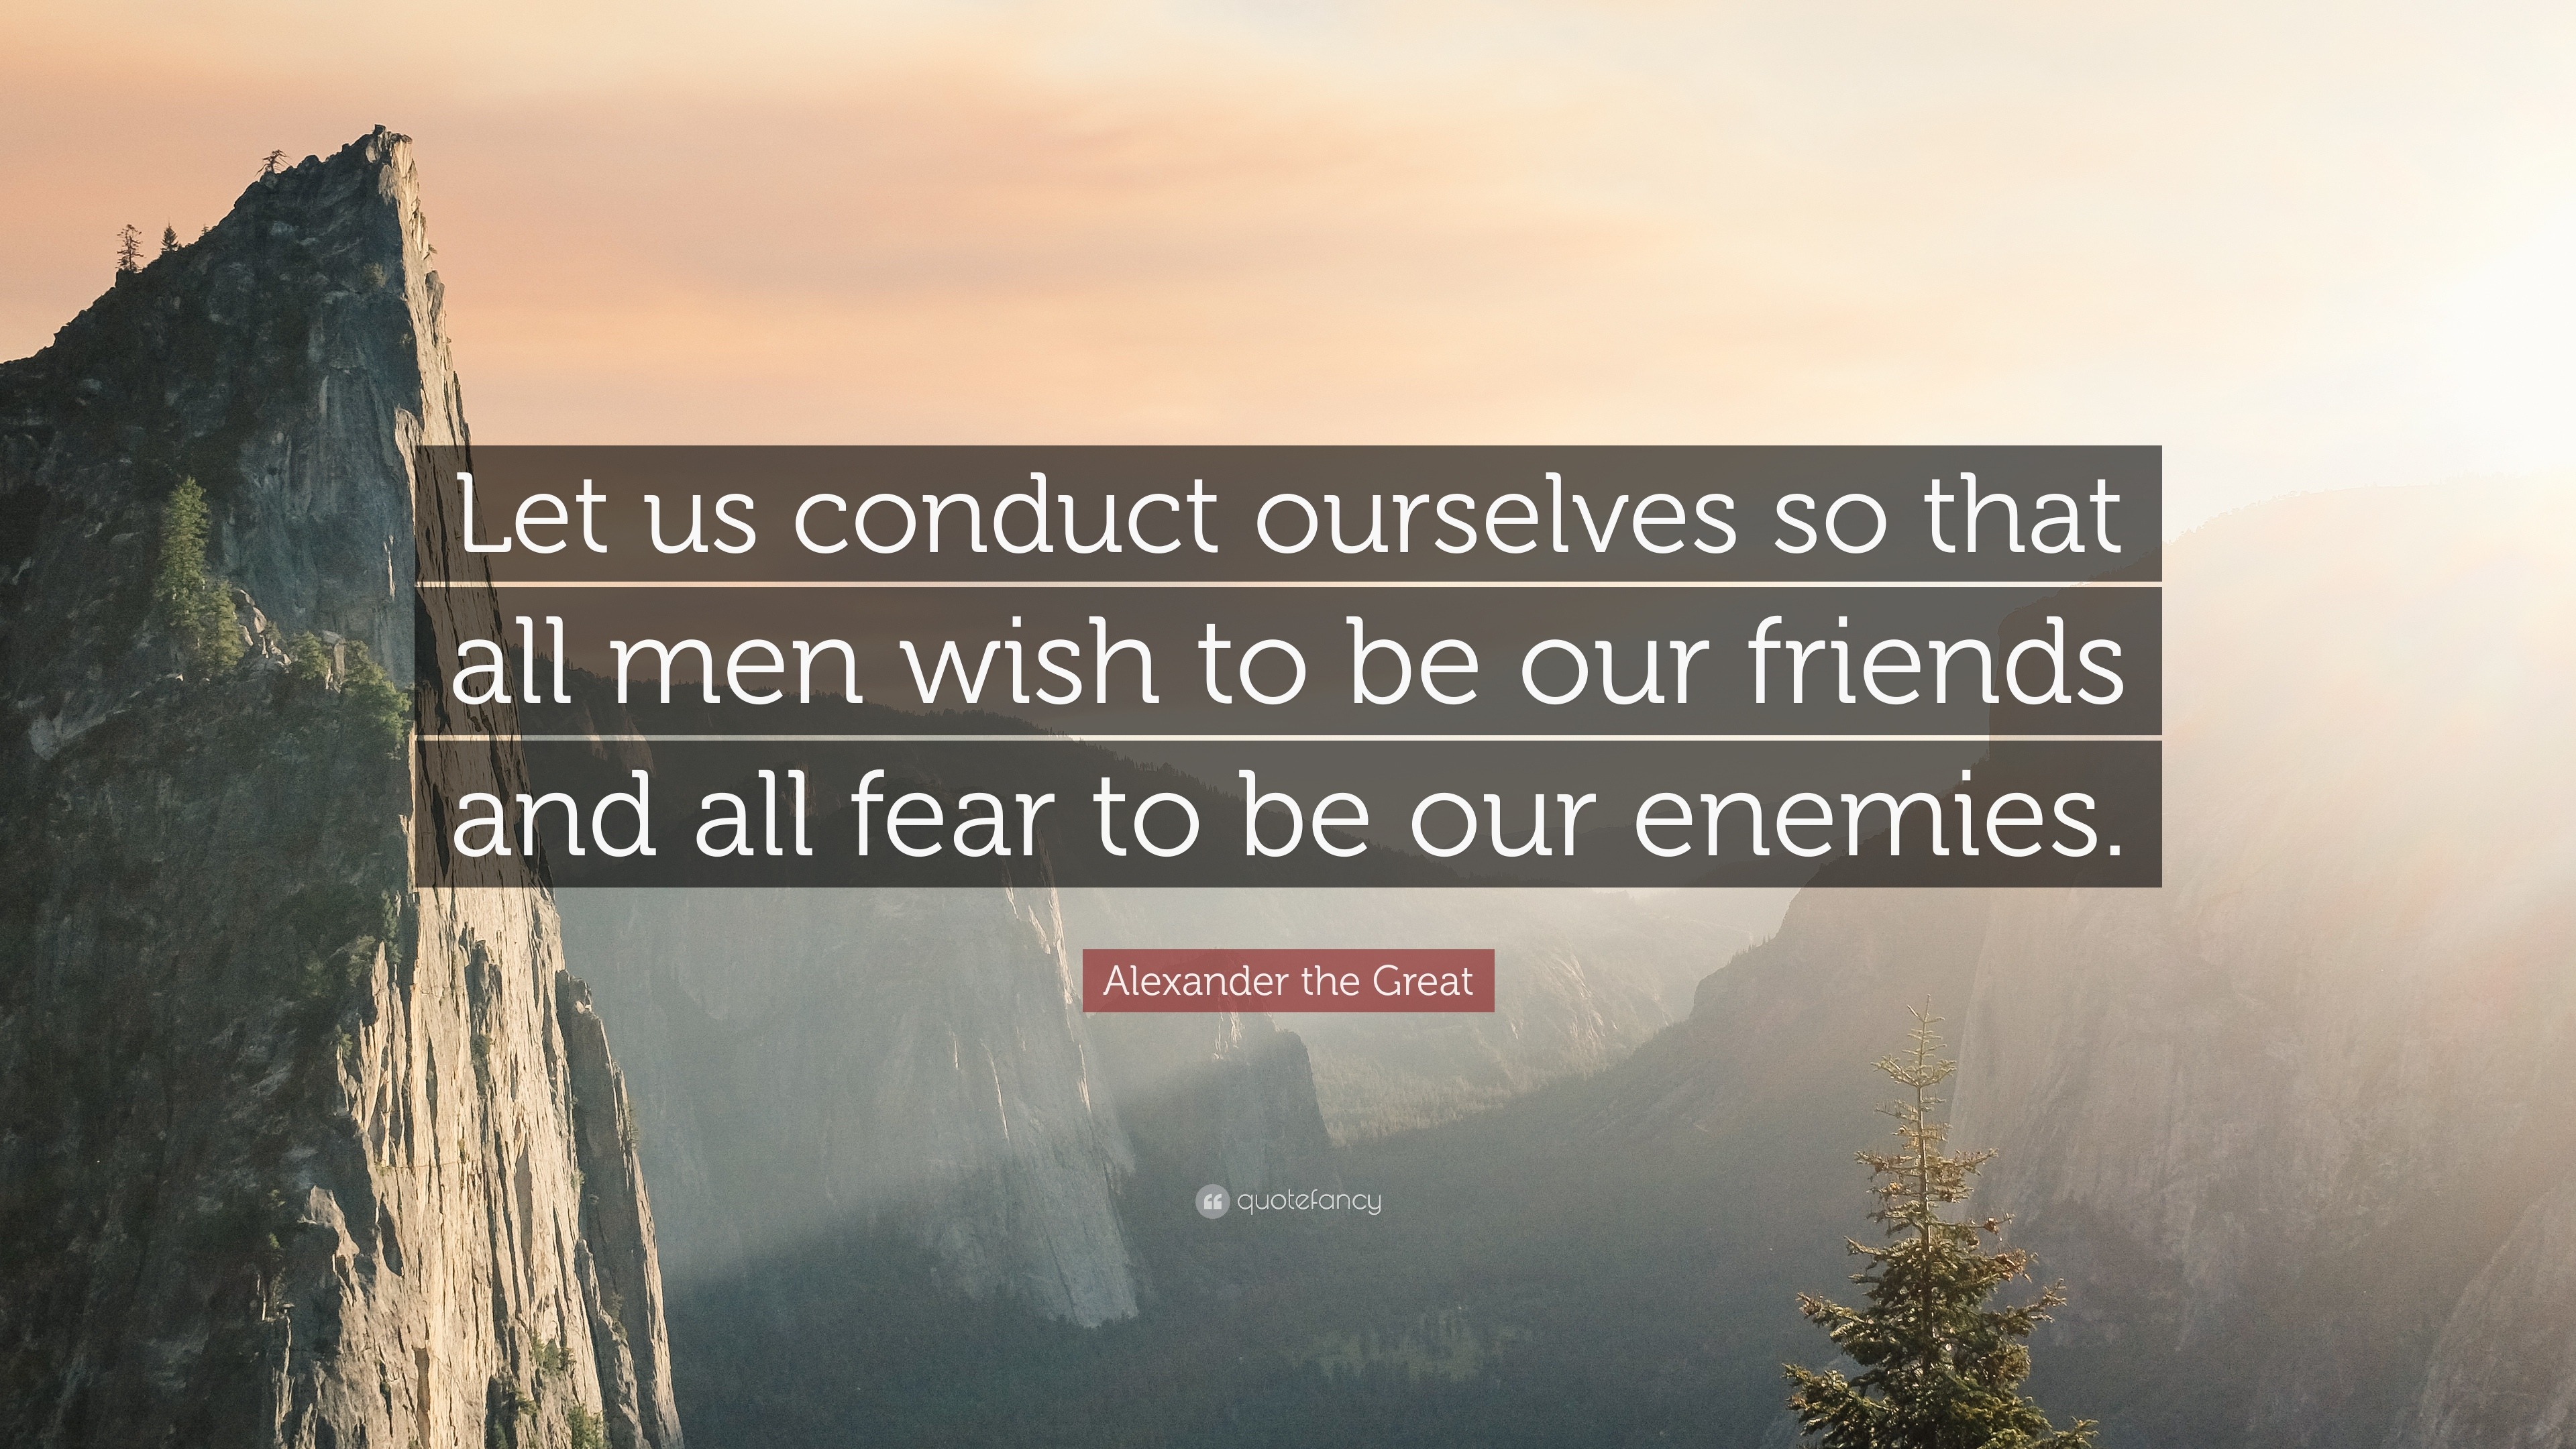 Alexander the Great Quote: “Let us conduct ourselves so that all men